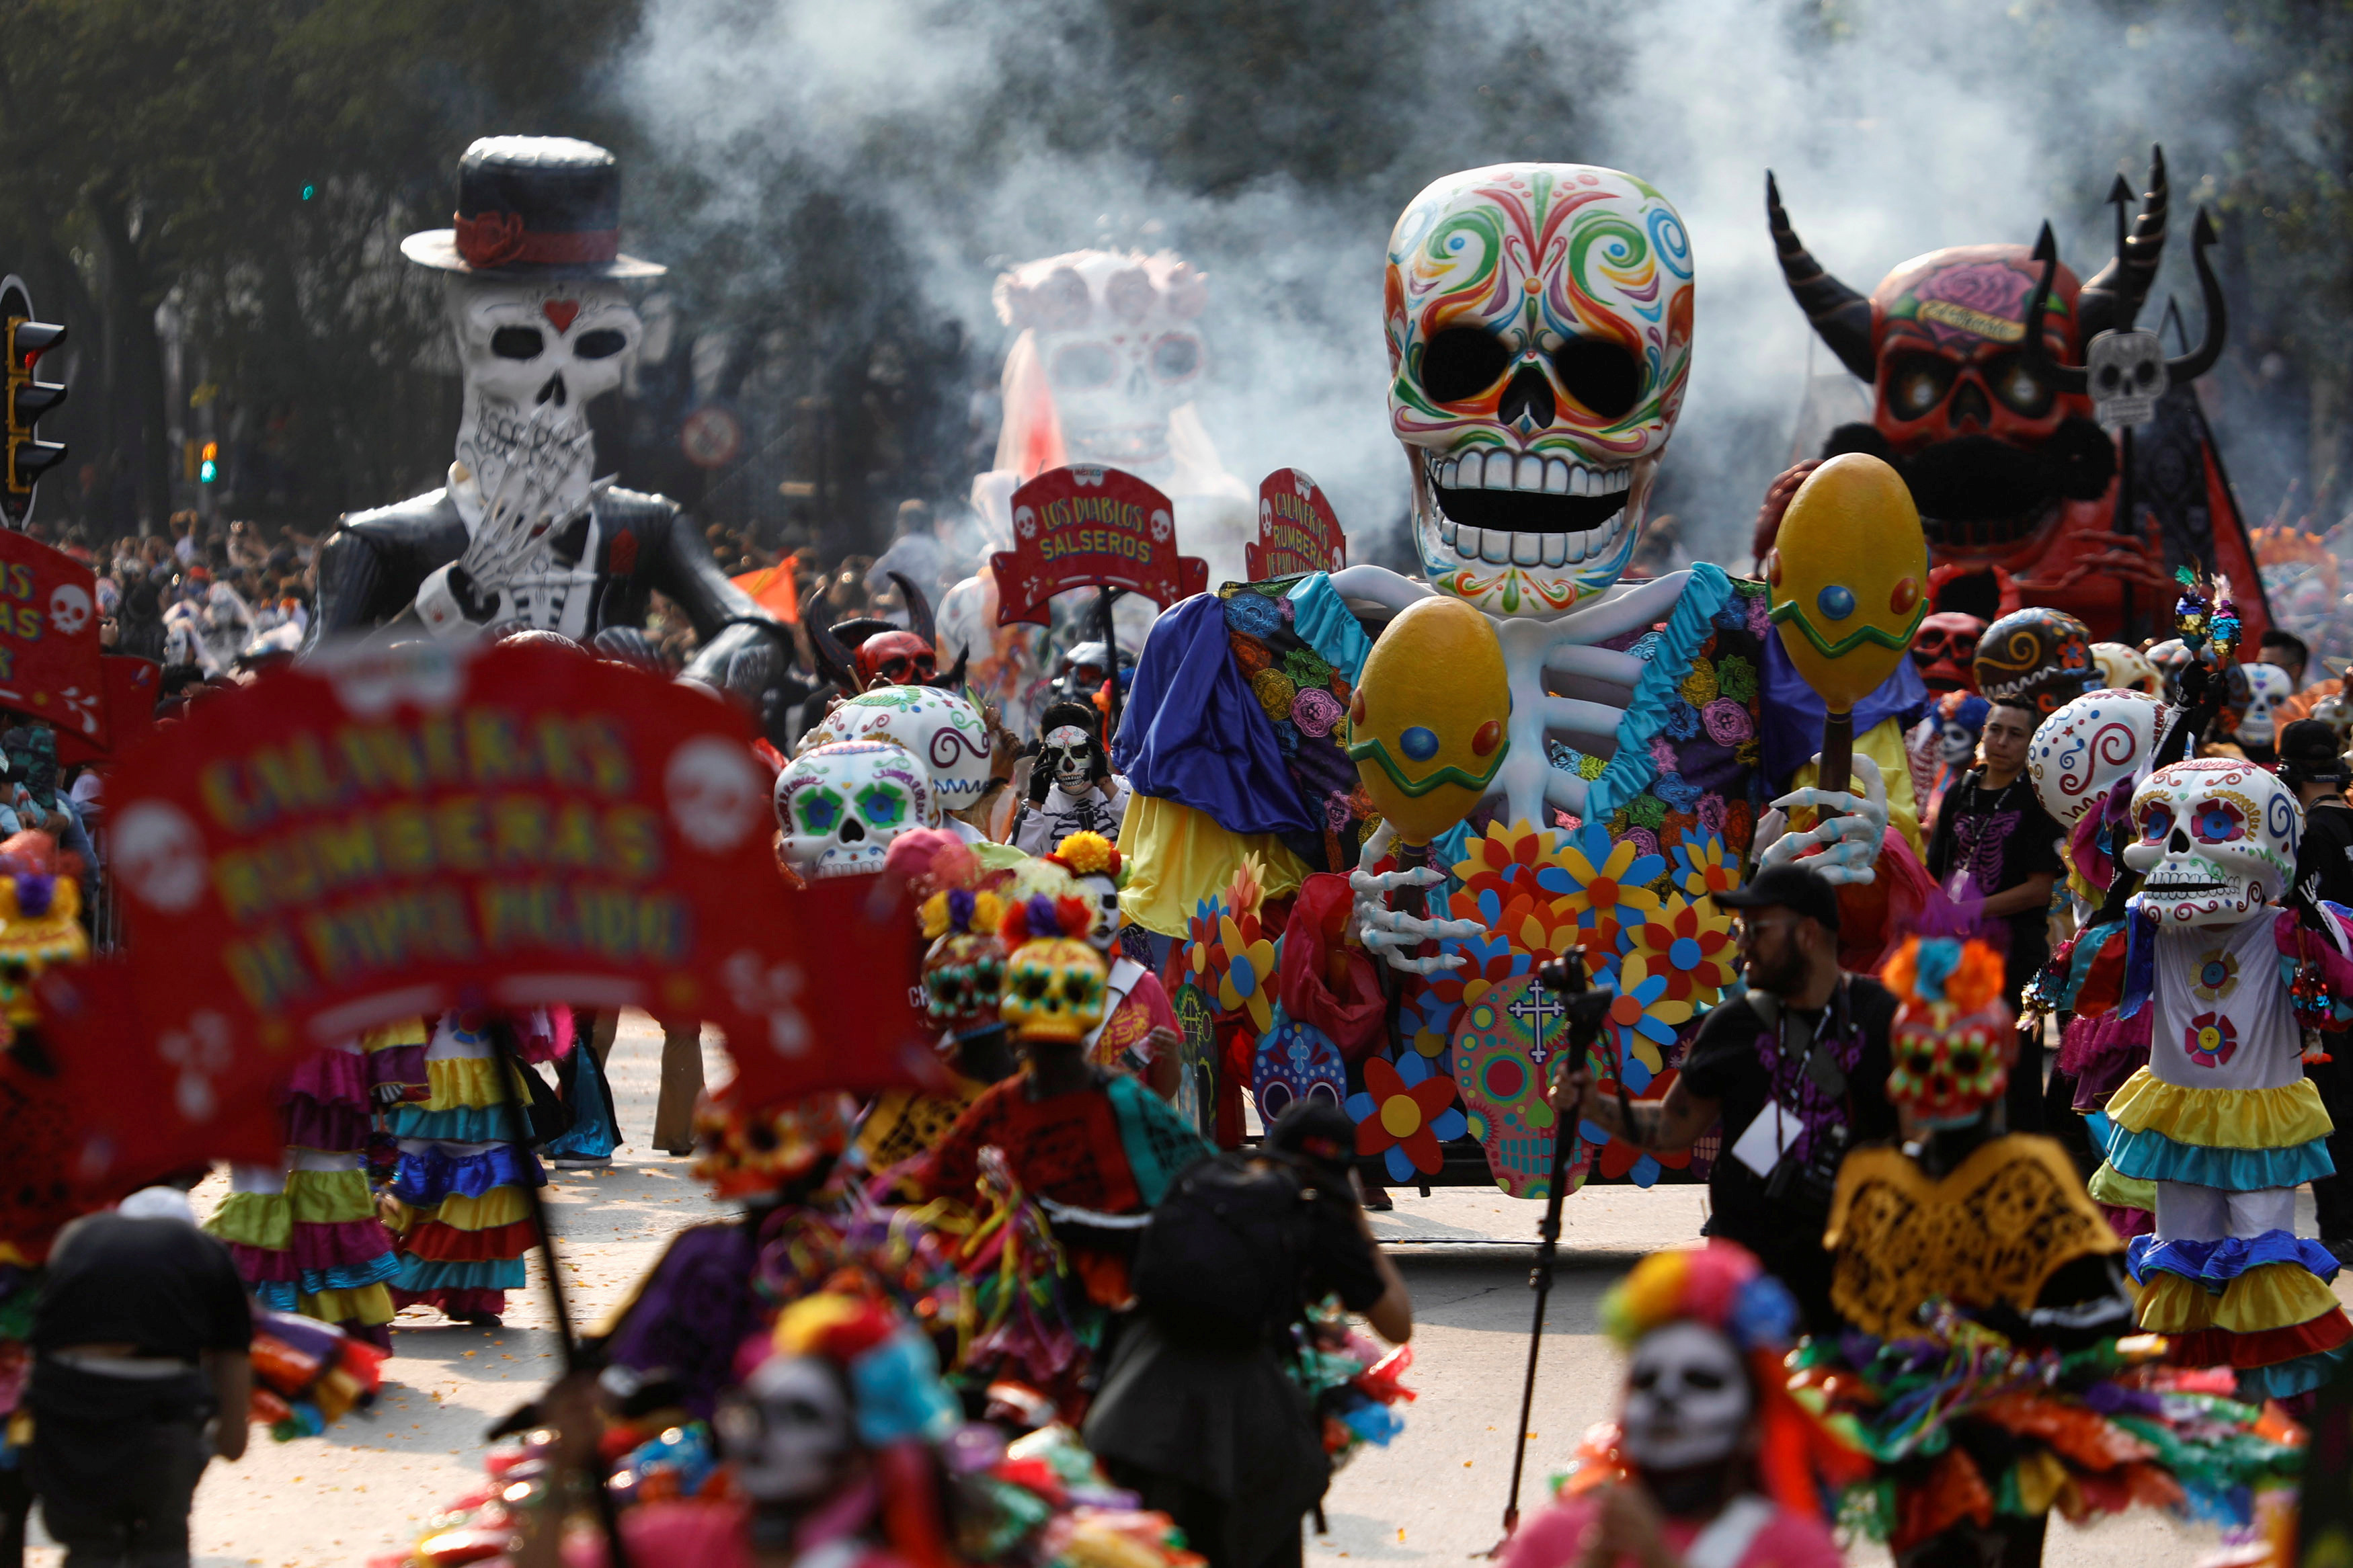 Skull figures are seen during a procession to commemorate Day of the Dead in Mexico City, Mexico, October 28, 2017. REUTERS/Edgard Garrido